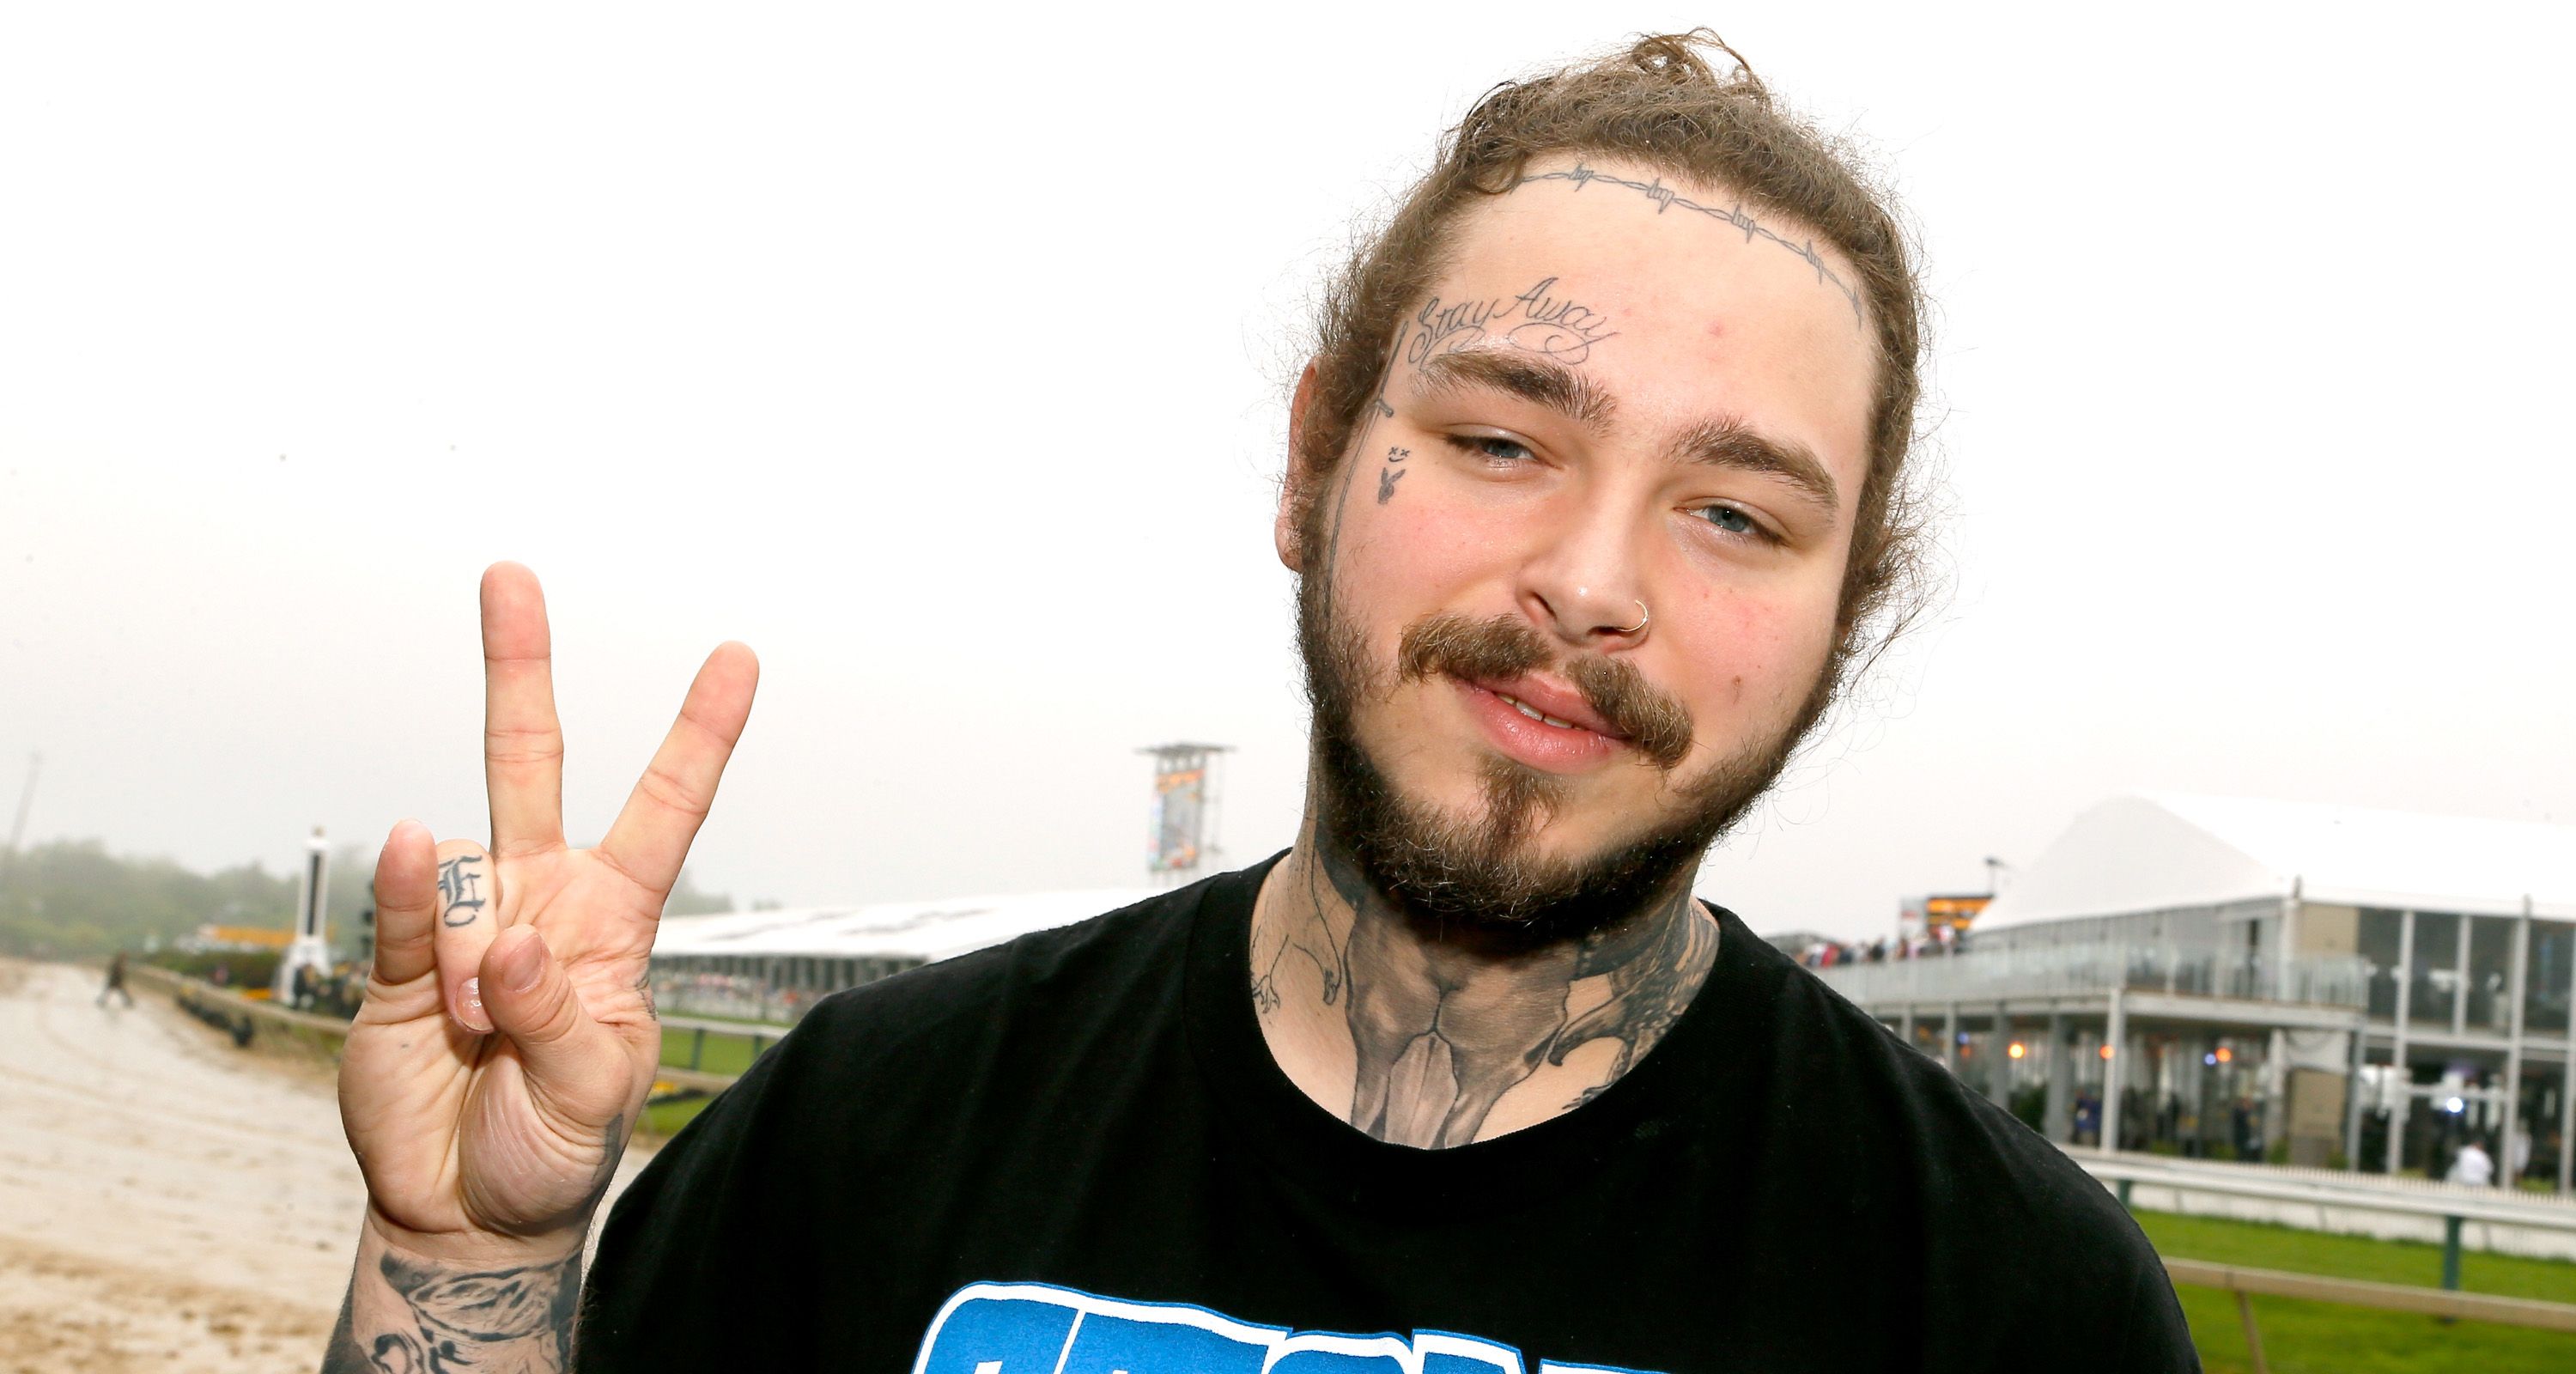 Share 86 about post malone without tattoos super cool  indaotaonec